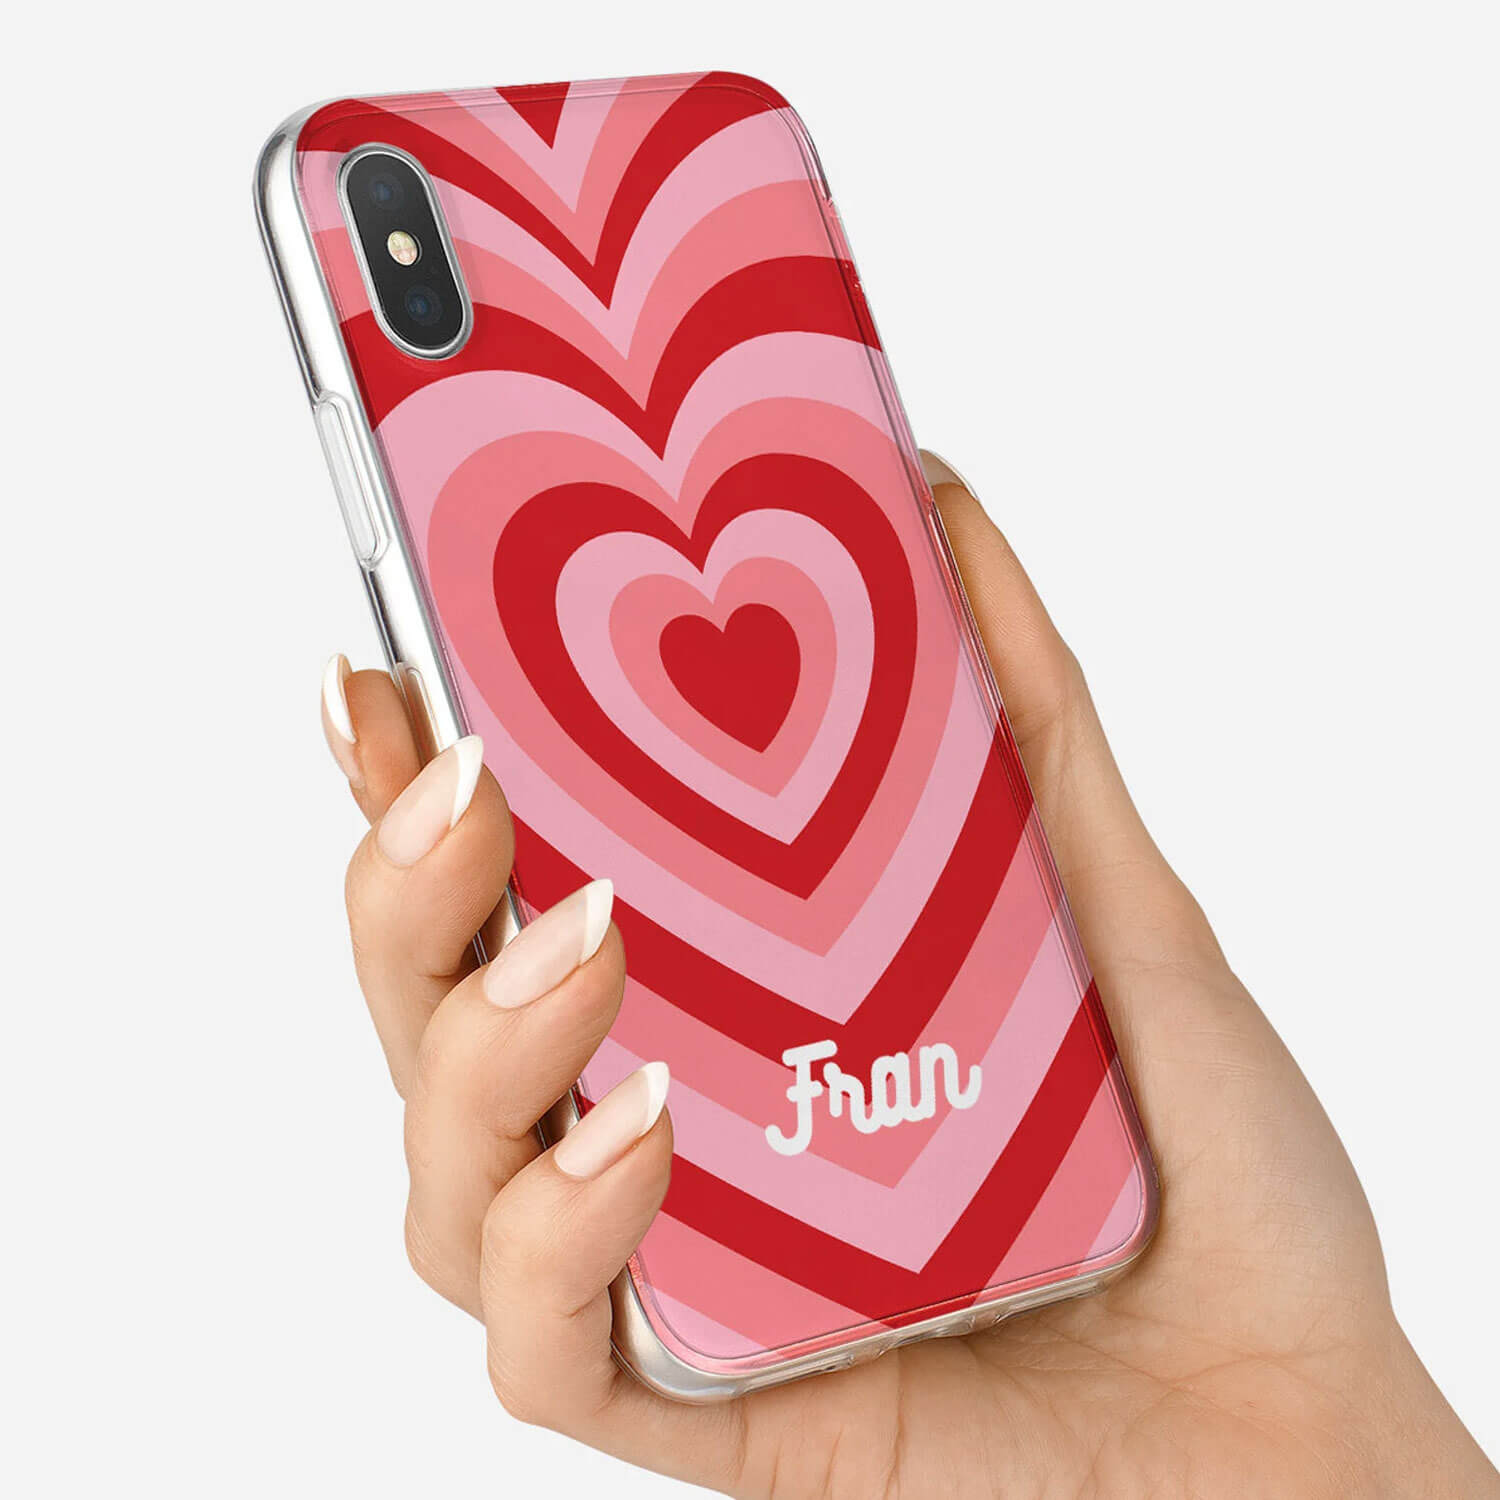 Wrappz phone case with a popular, retro pink and red heart design and a personalised name in white text.